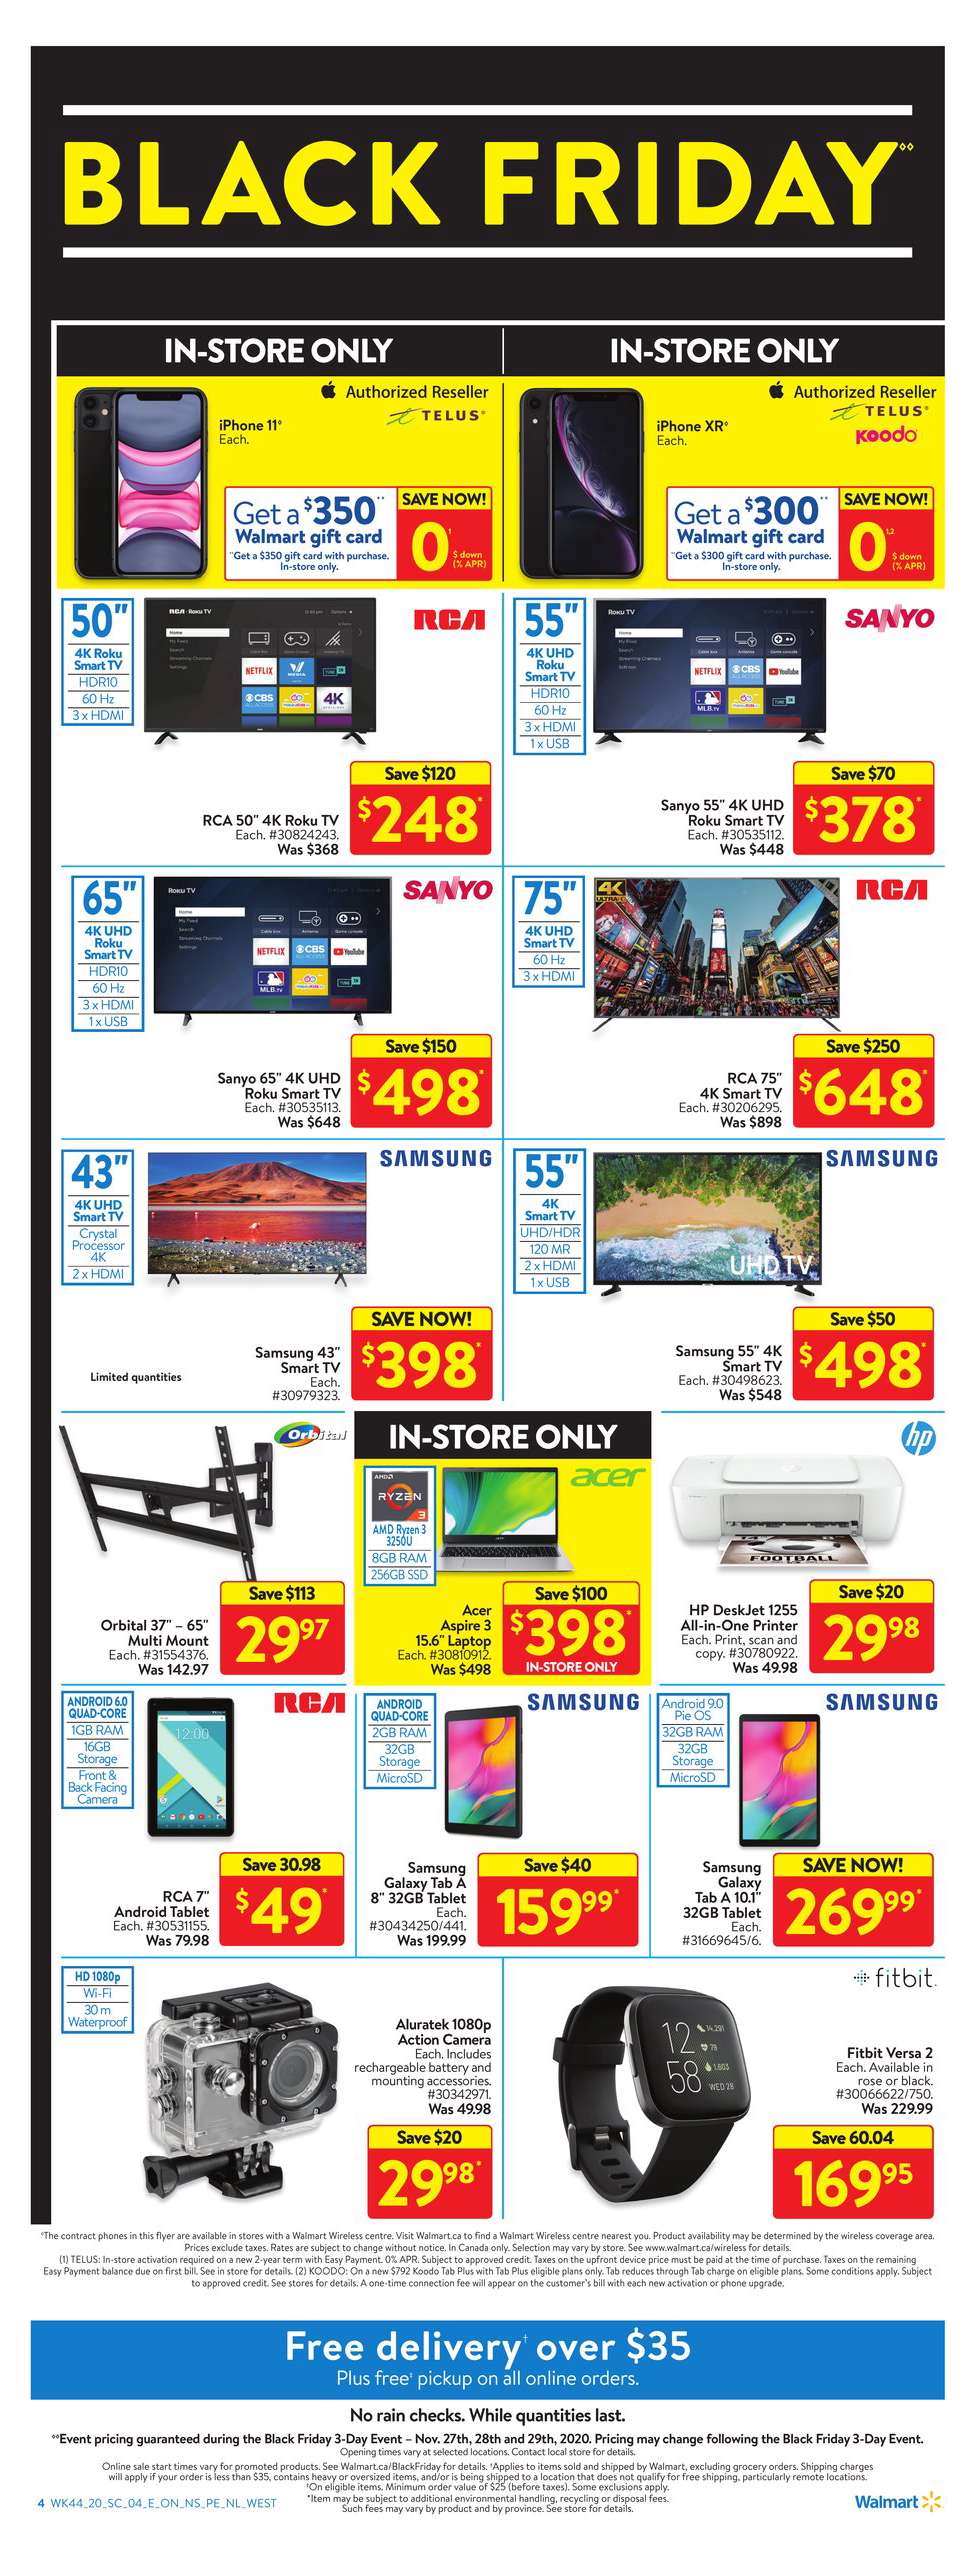 Walmart Black Friday Flyer Deals 2020 Canada - What Are The Black Friday Deals Today